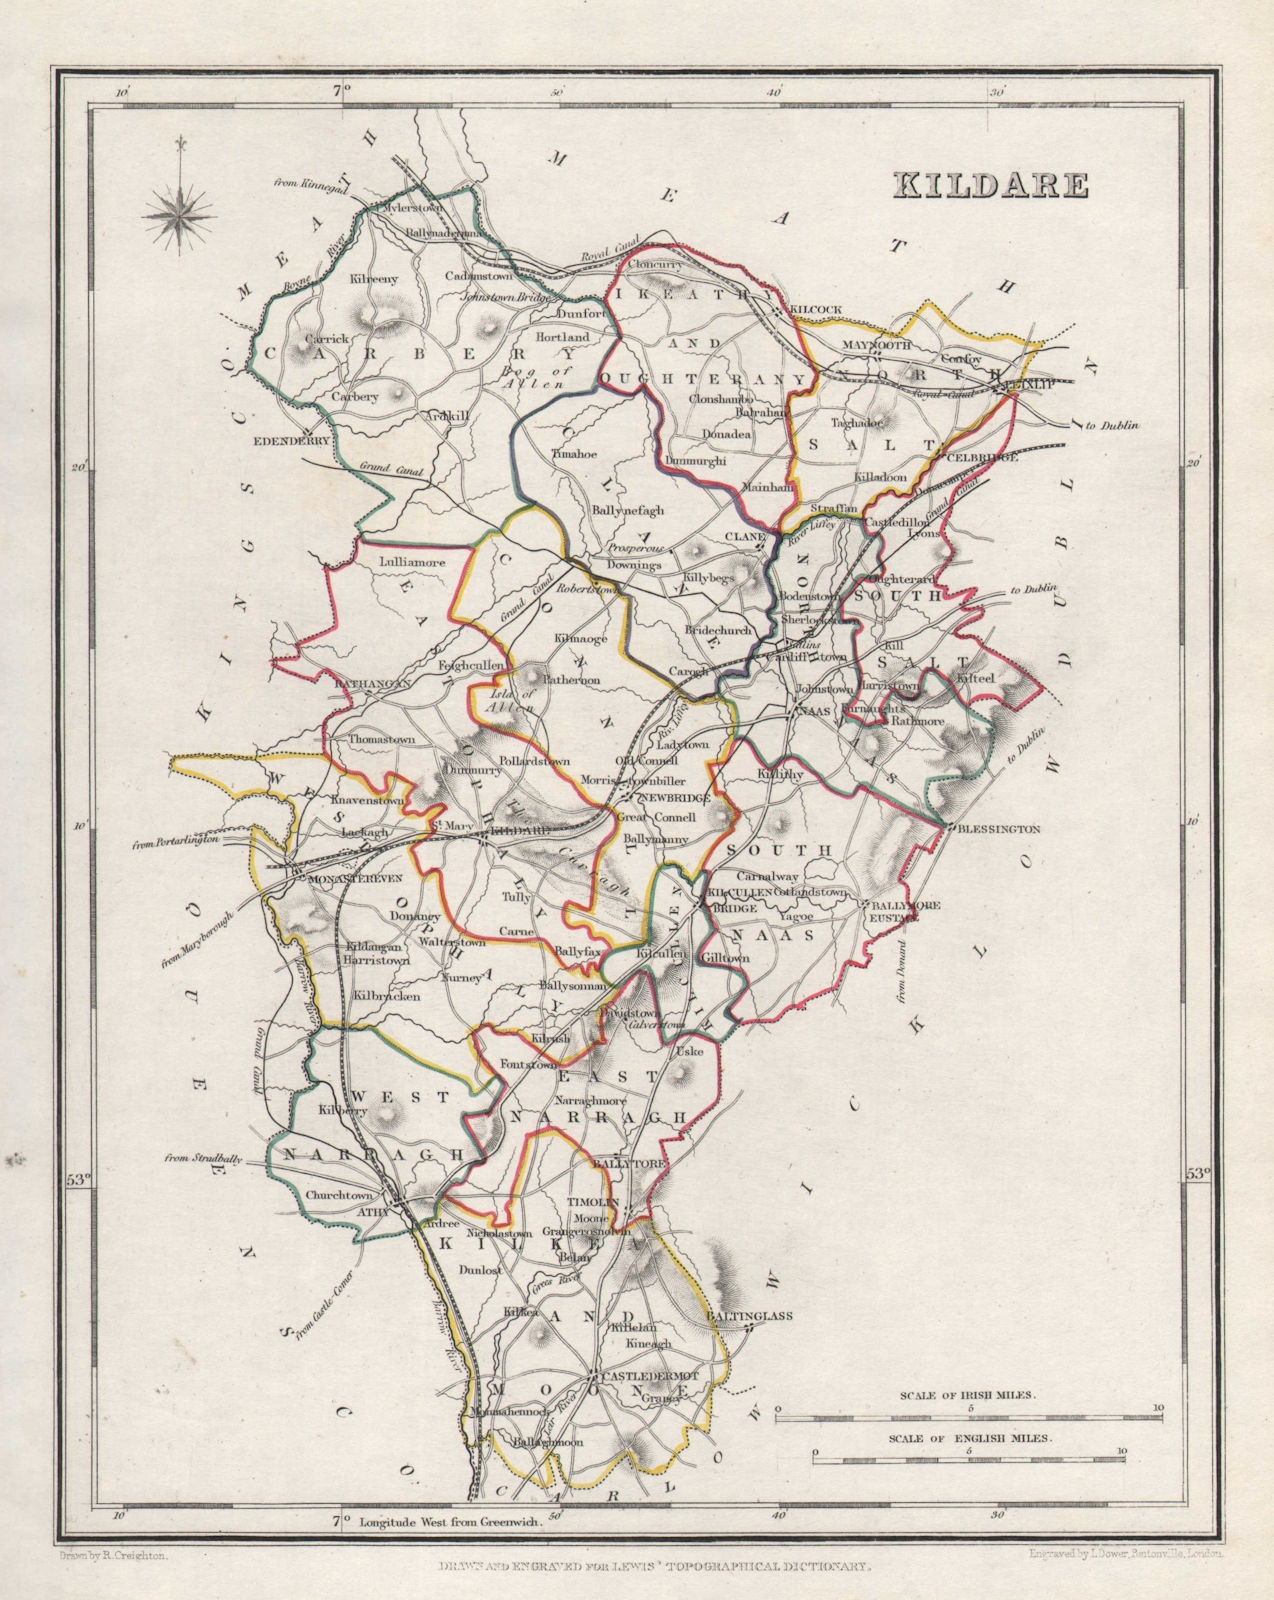 Associate Product COUNTY KILDARE antique map for LEWIS by CREIGHTON & DOWER. Ireland 1846